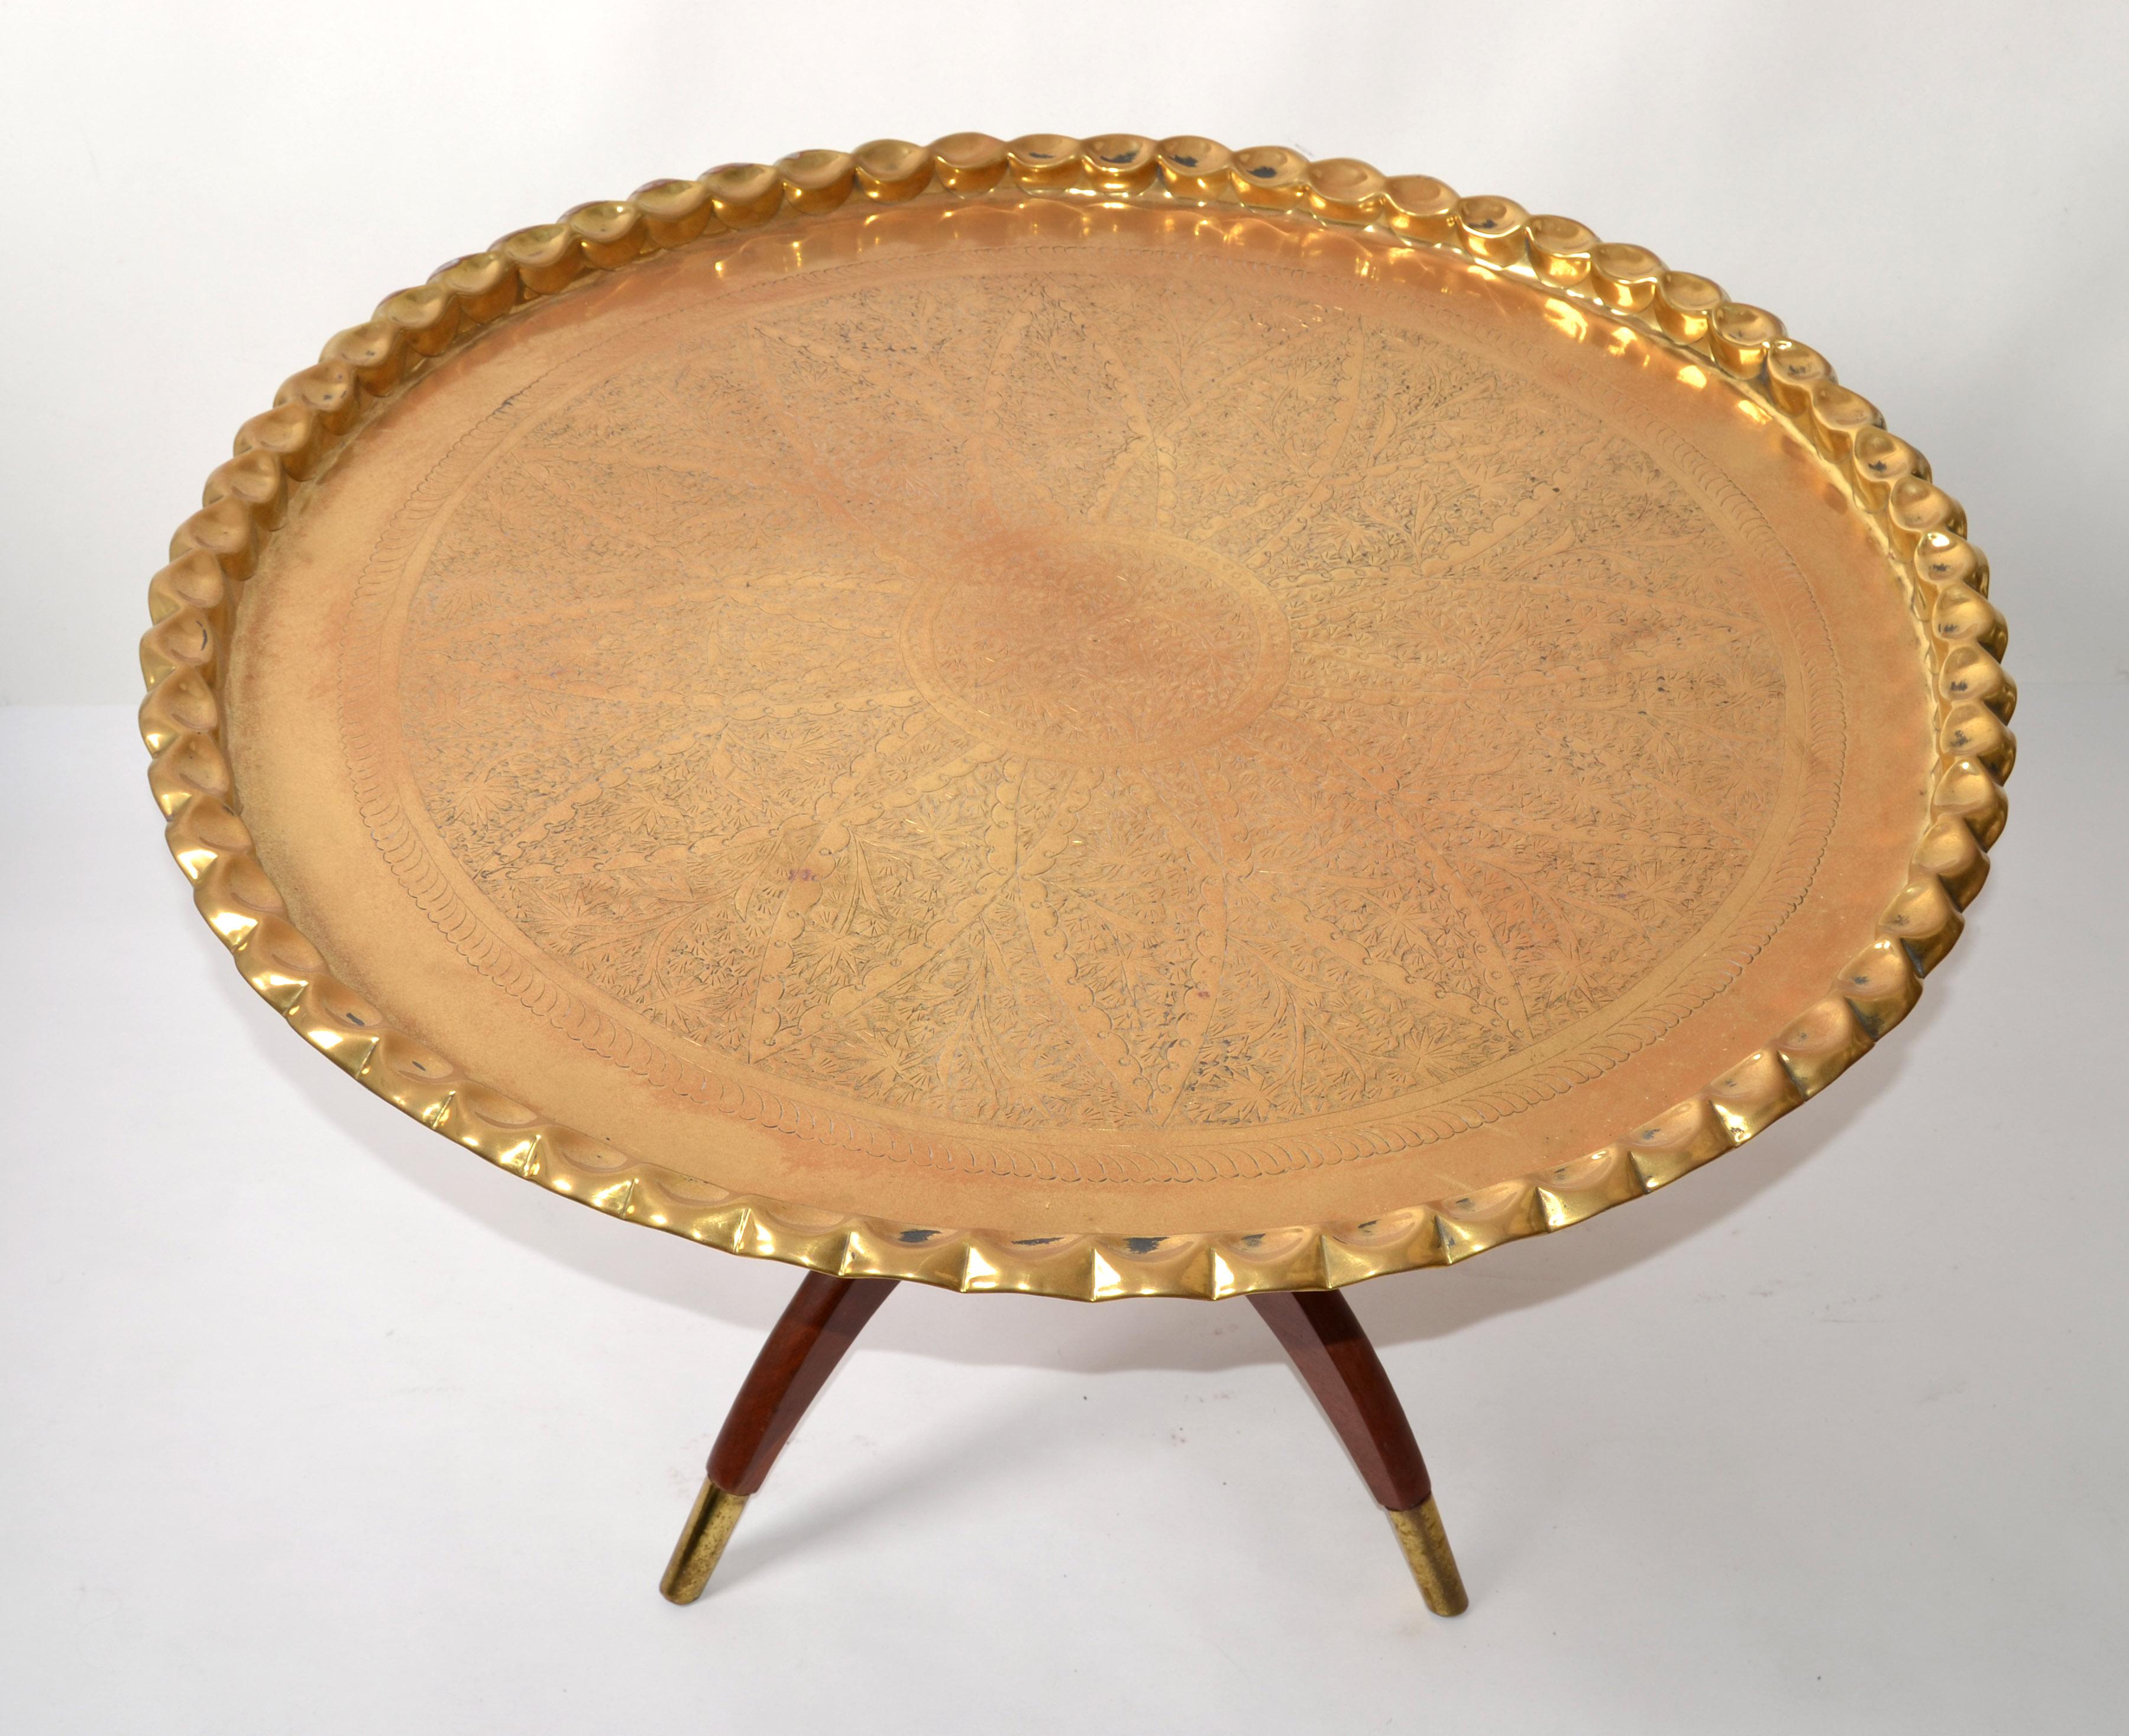 Oriental Vintage Round Walnut Spider Leg and Bronze Moroccan Tray Coffee Table For Sale 6